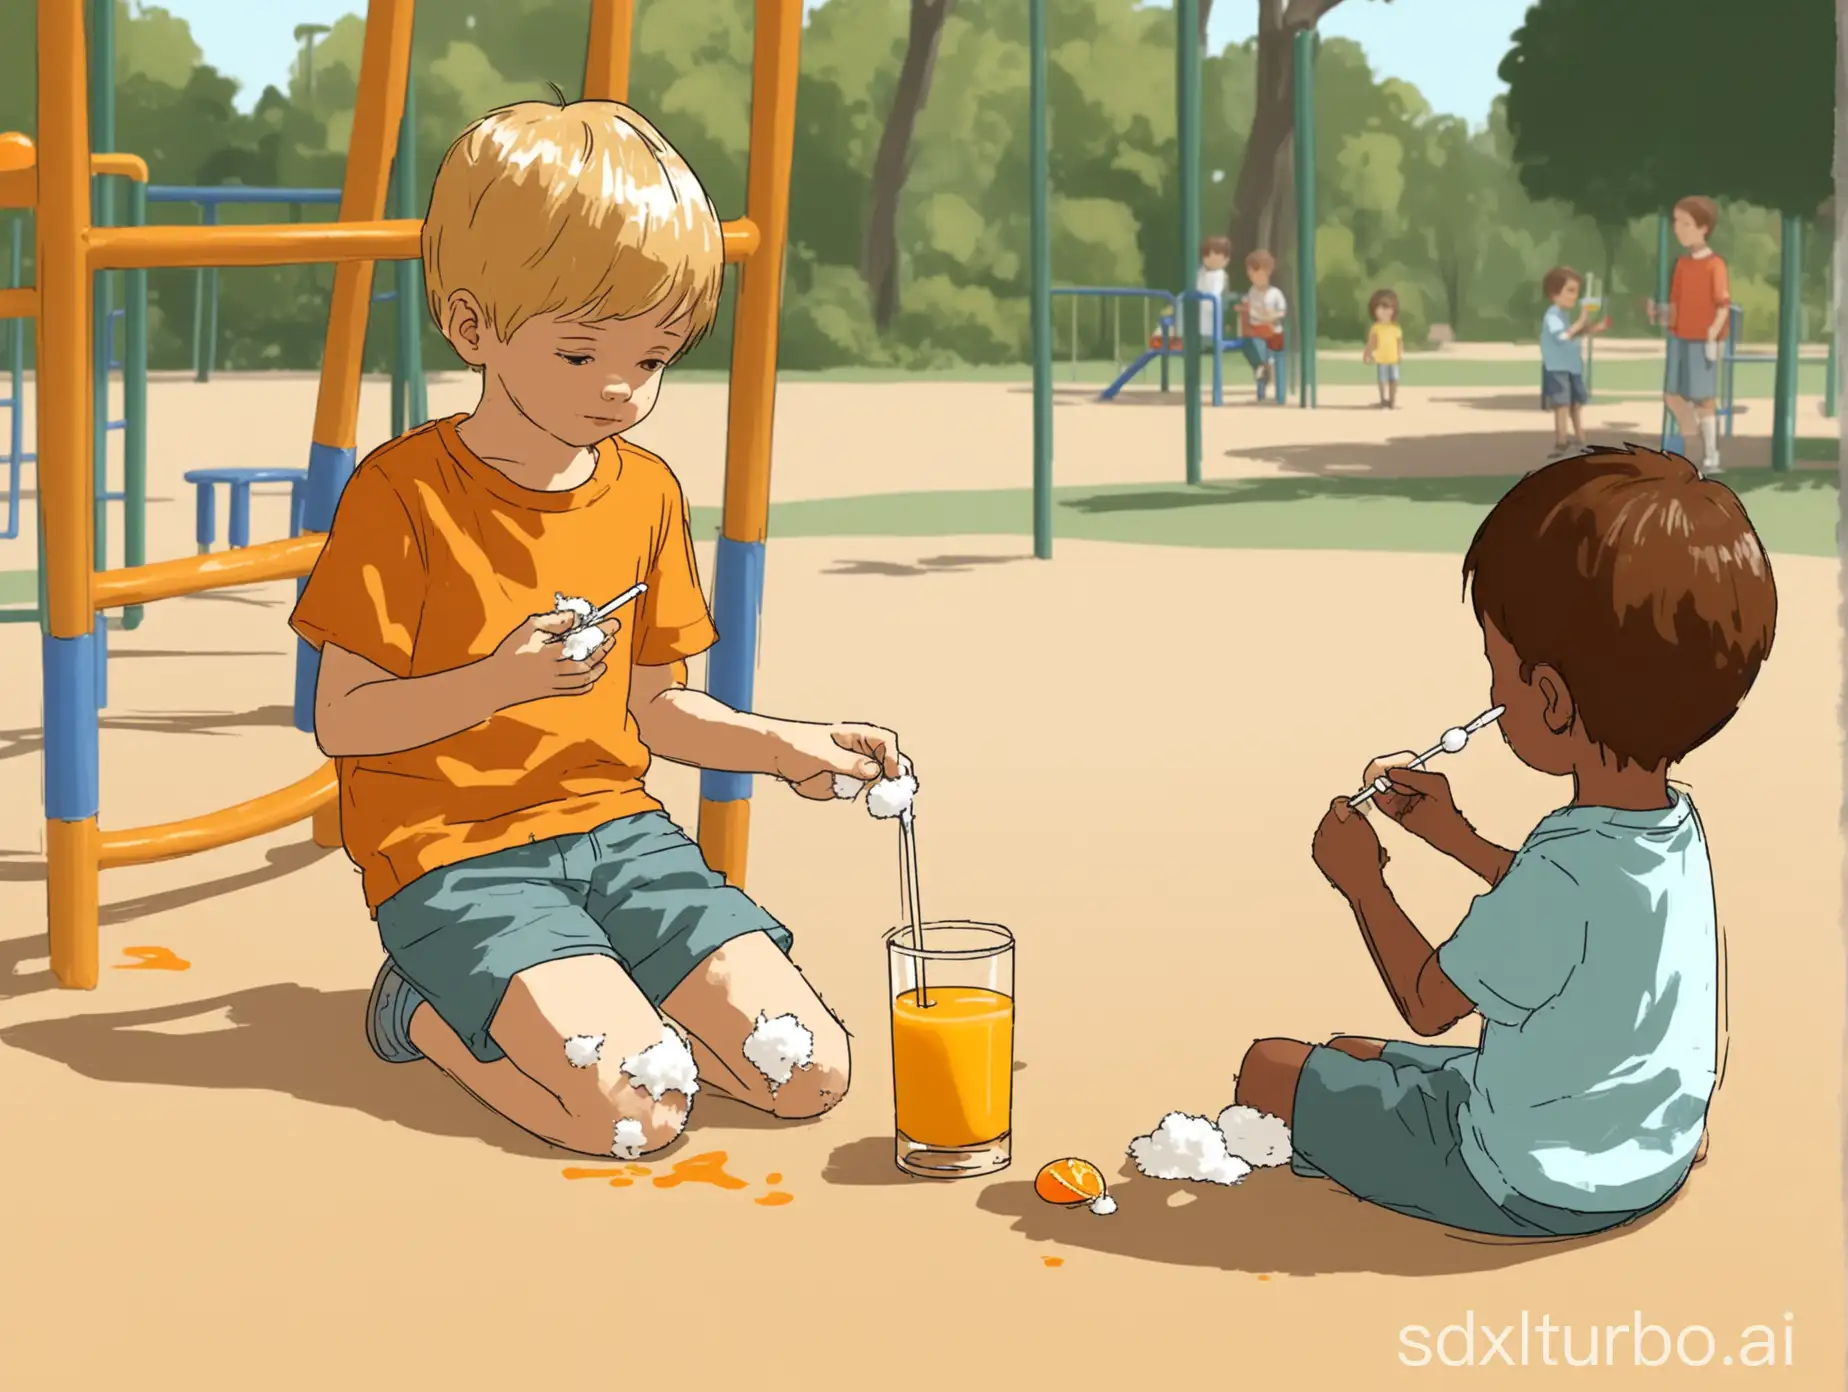 Draw a picture of a little boy on the playground, with iodine in his left hand and a cotton swab in his right, treating a scrape on his knee, and a little girl nearby with a glass of orange juice looking at him concernedly, in a two-dimensional animation style.